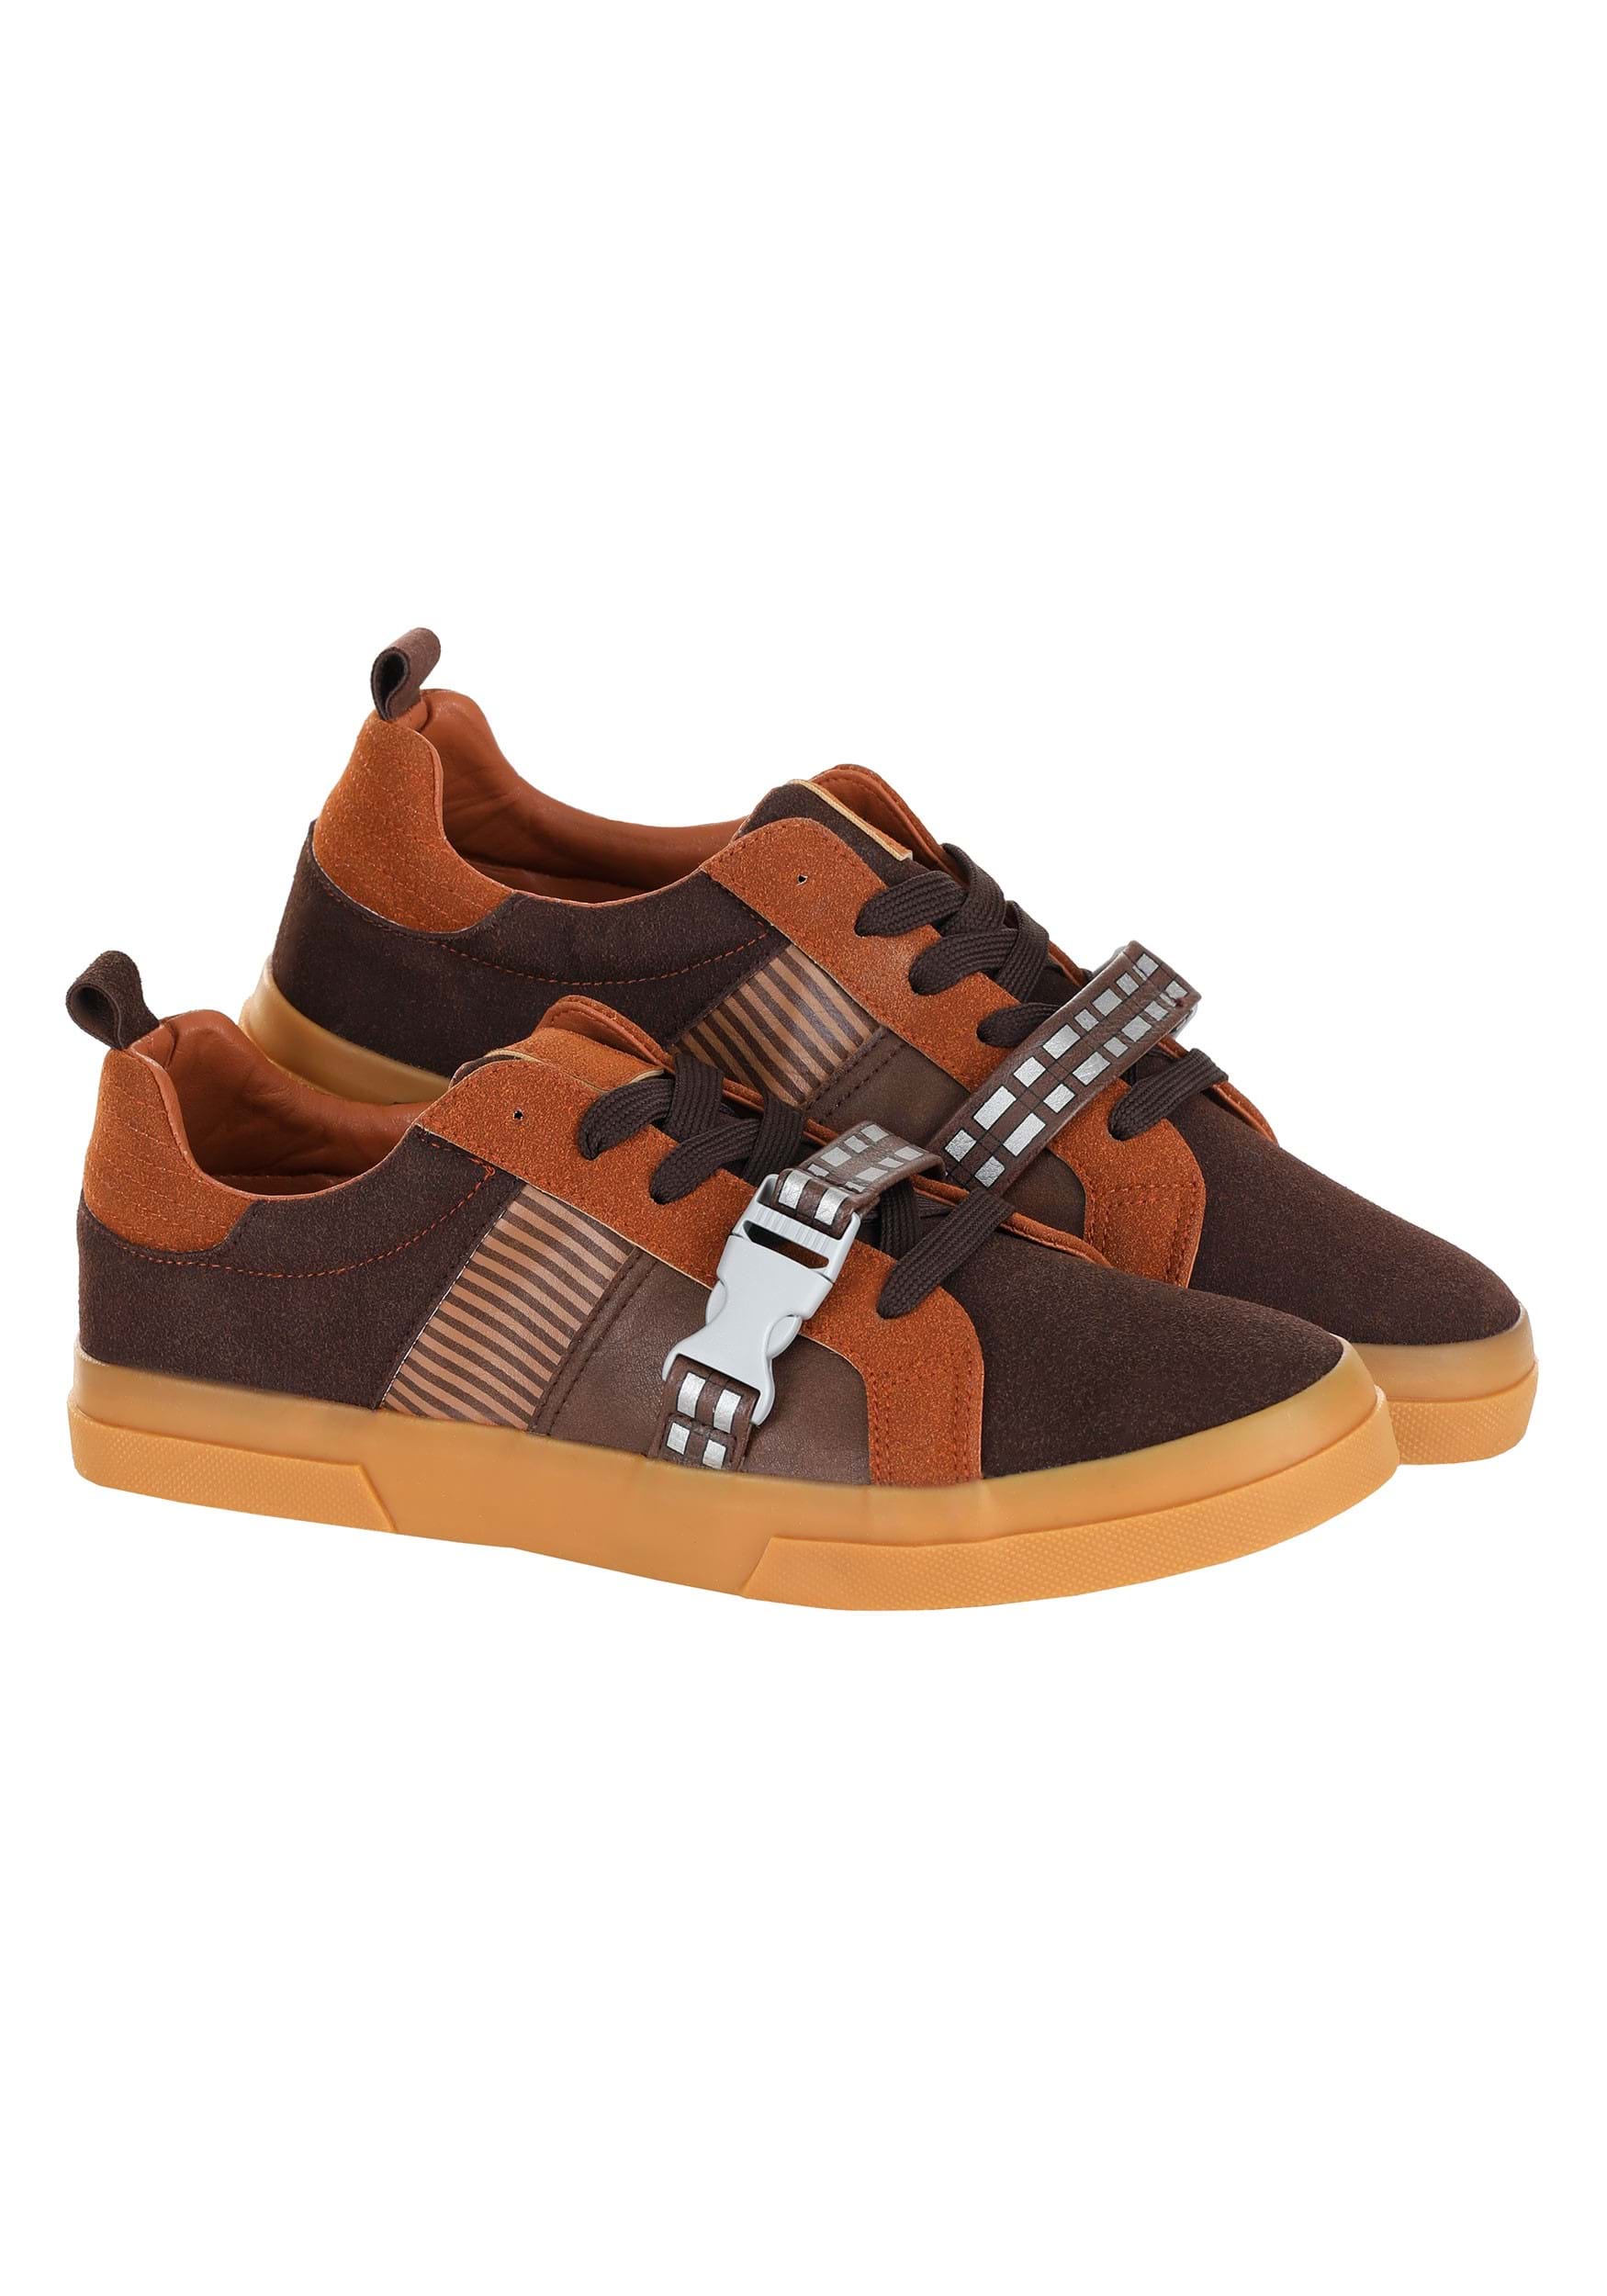 Unisex Star Wars Chewbacca Low-Top Shoes